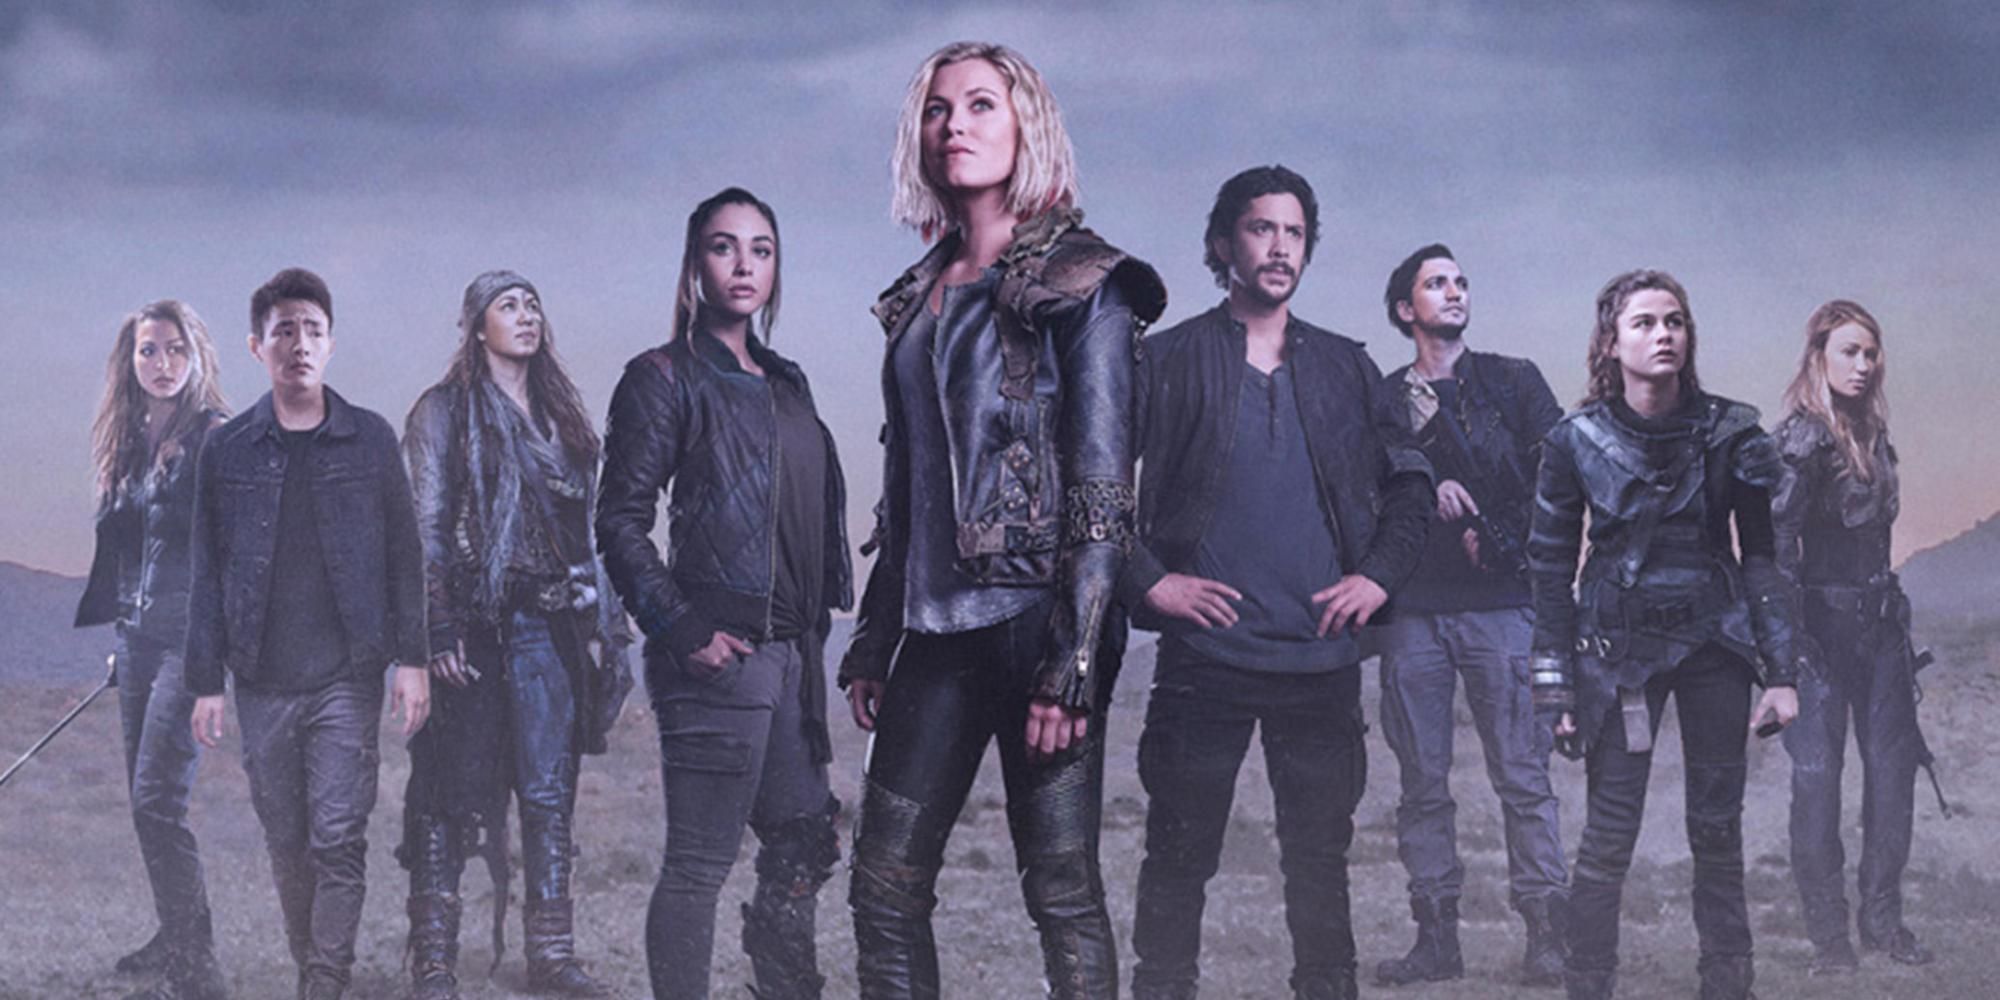 The cast of The 100 with Clarke Griffin and Bellamy Blake in the middle